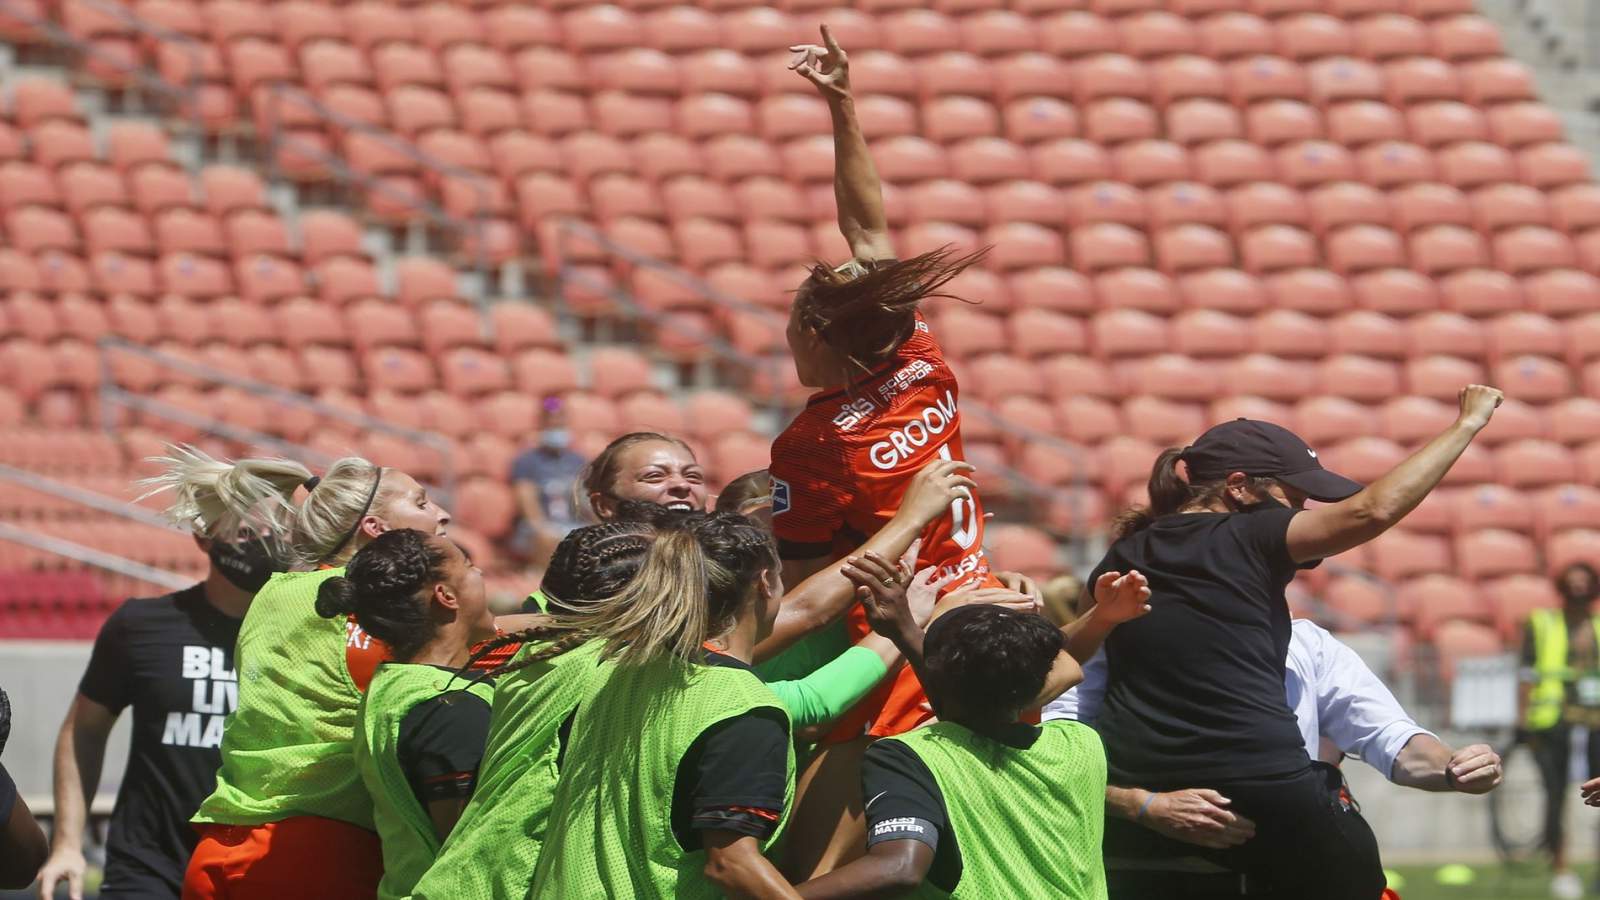 Houston Dash to celebrate championship win with drive-by parade Thursday